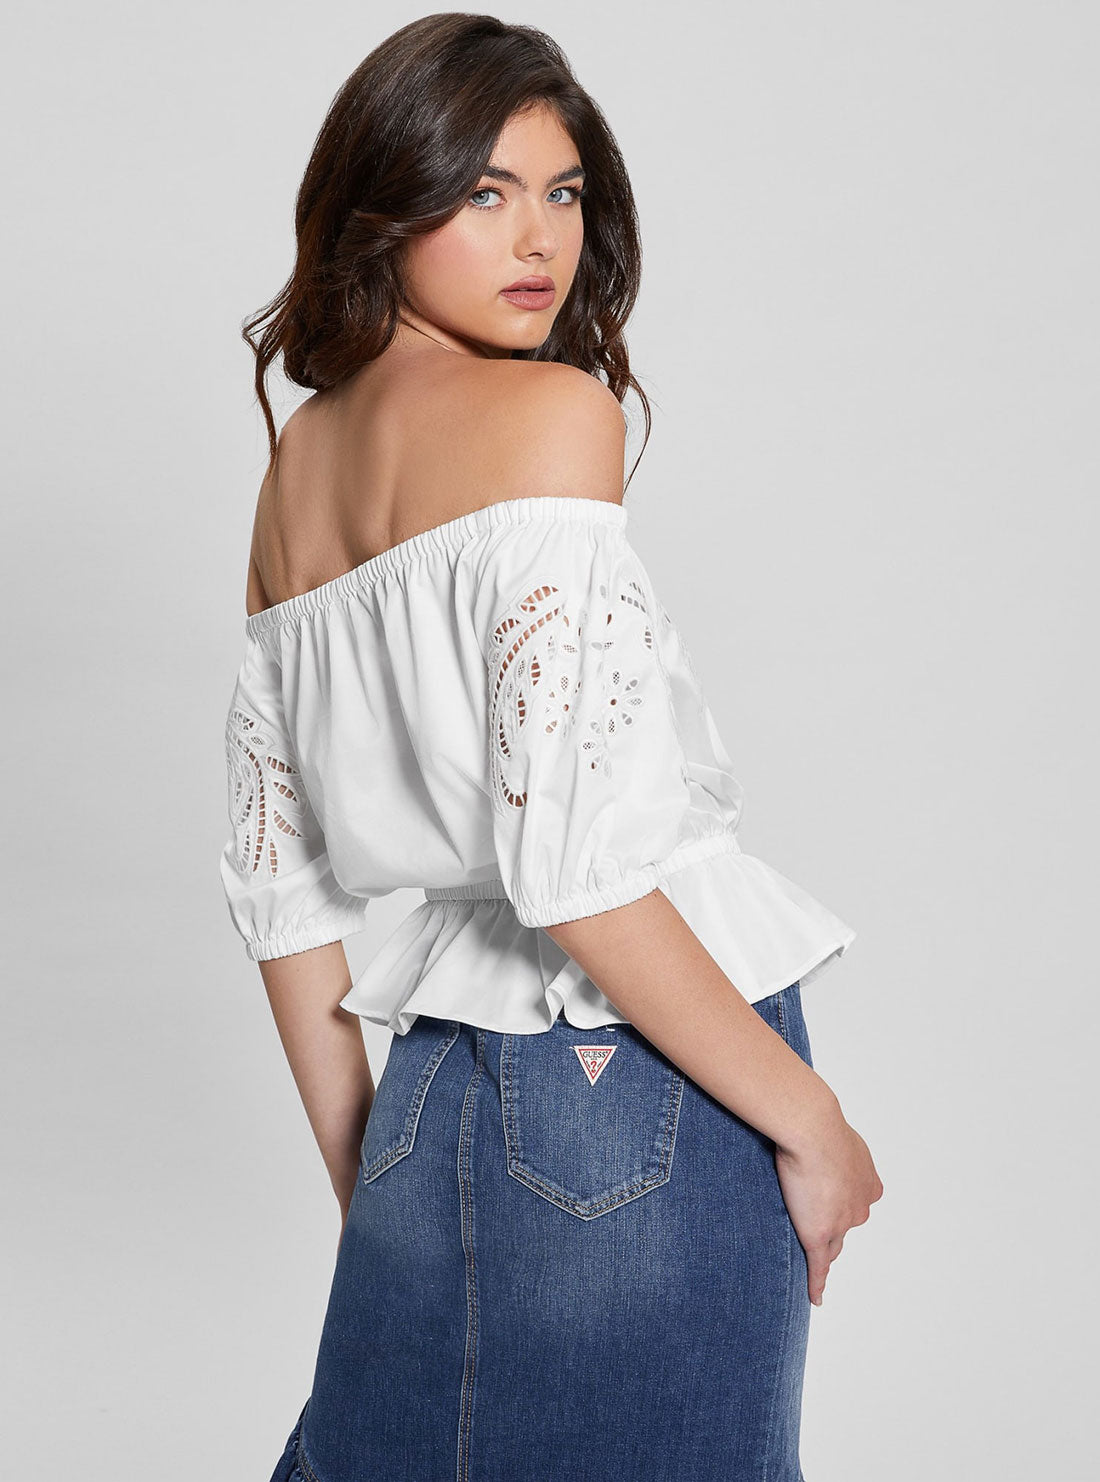 White Embroidered Lazo Top | GUESS Women's | Back view